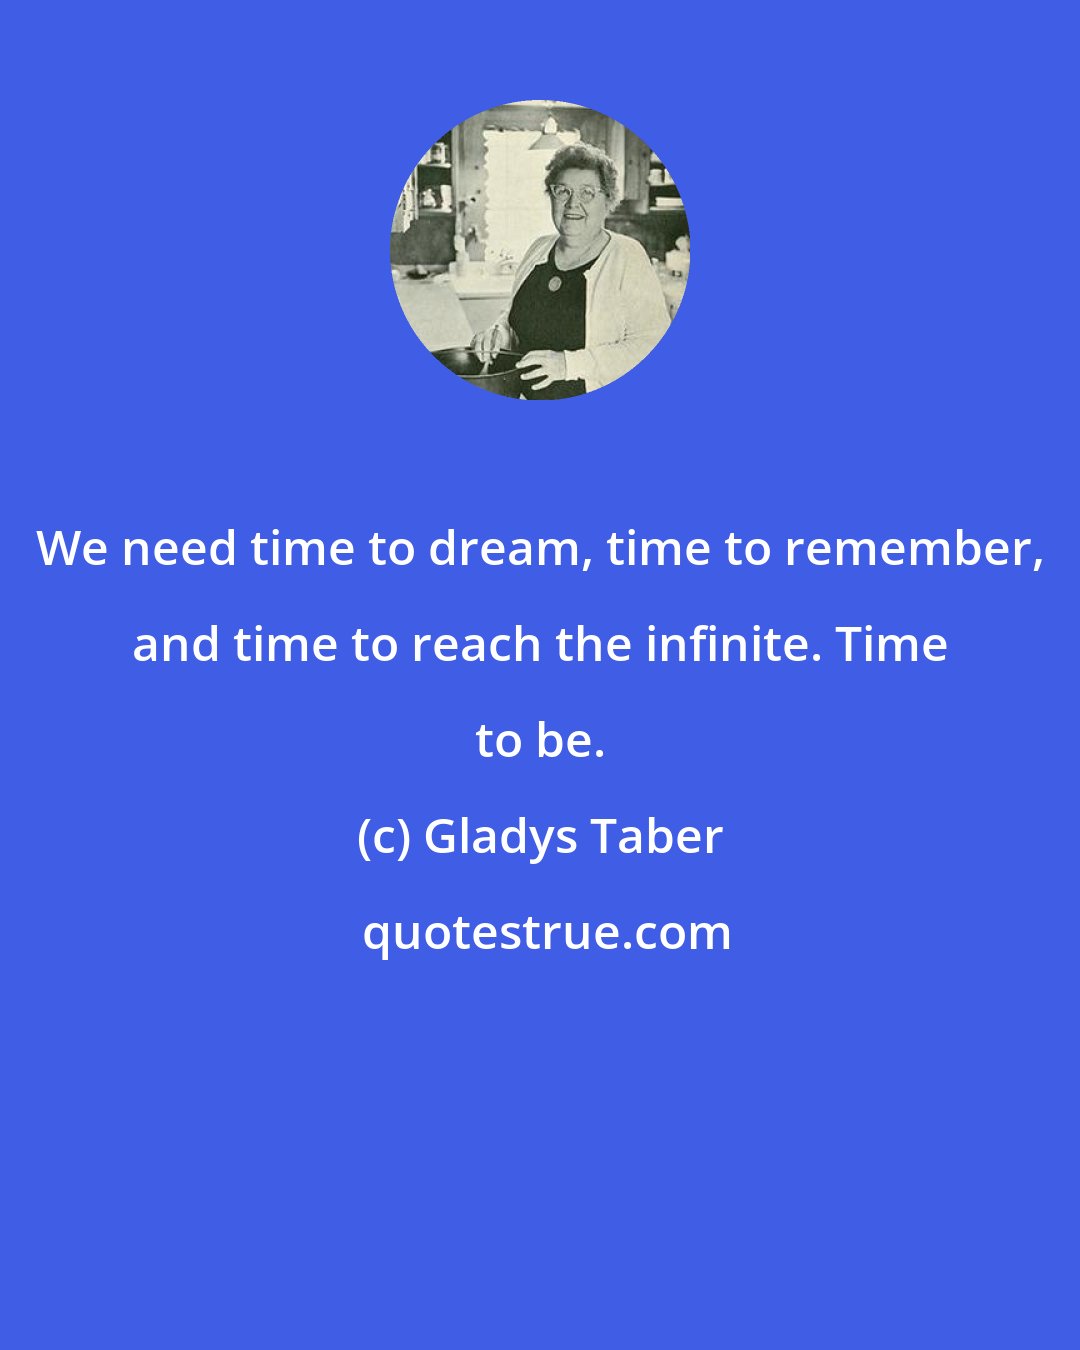 Gladys Taber: We need time to dream, time to remember, and time to reach the infinite. Time to be.